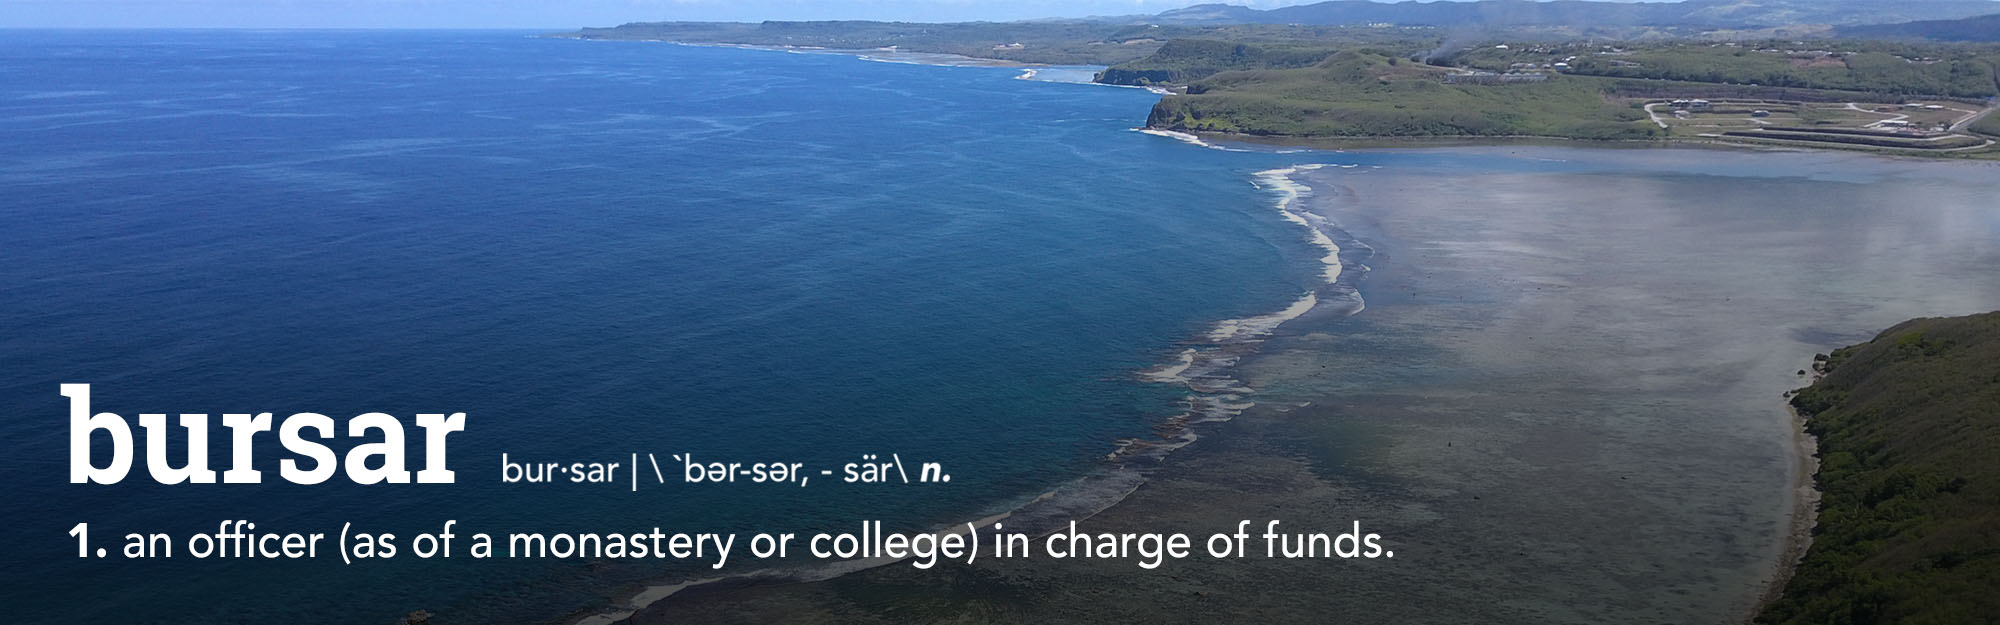 A view of pago bay with the dictionary definition of "Bursar"